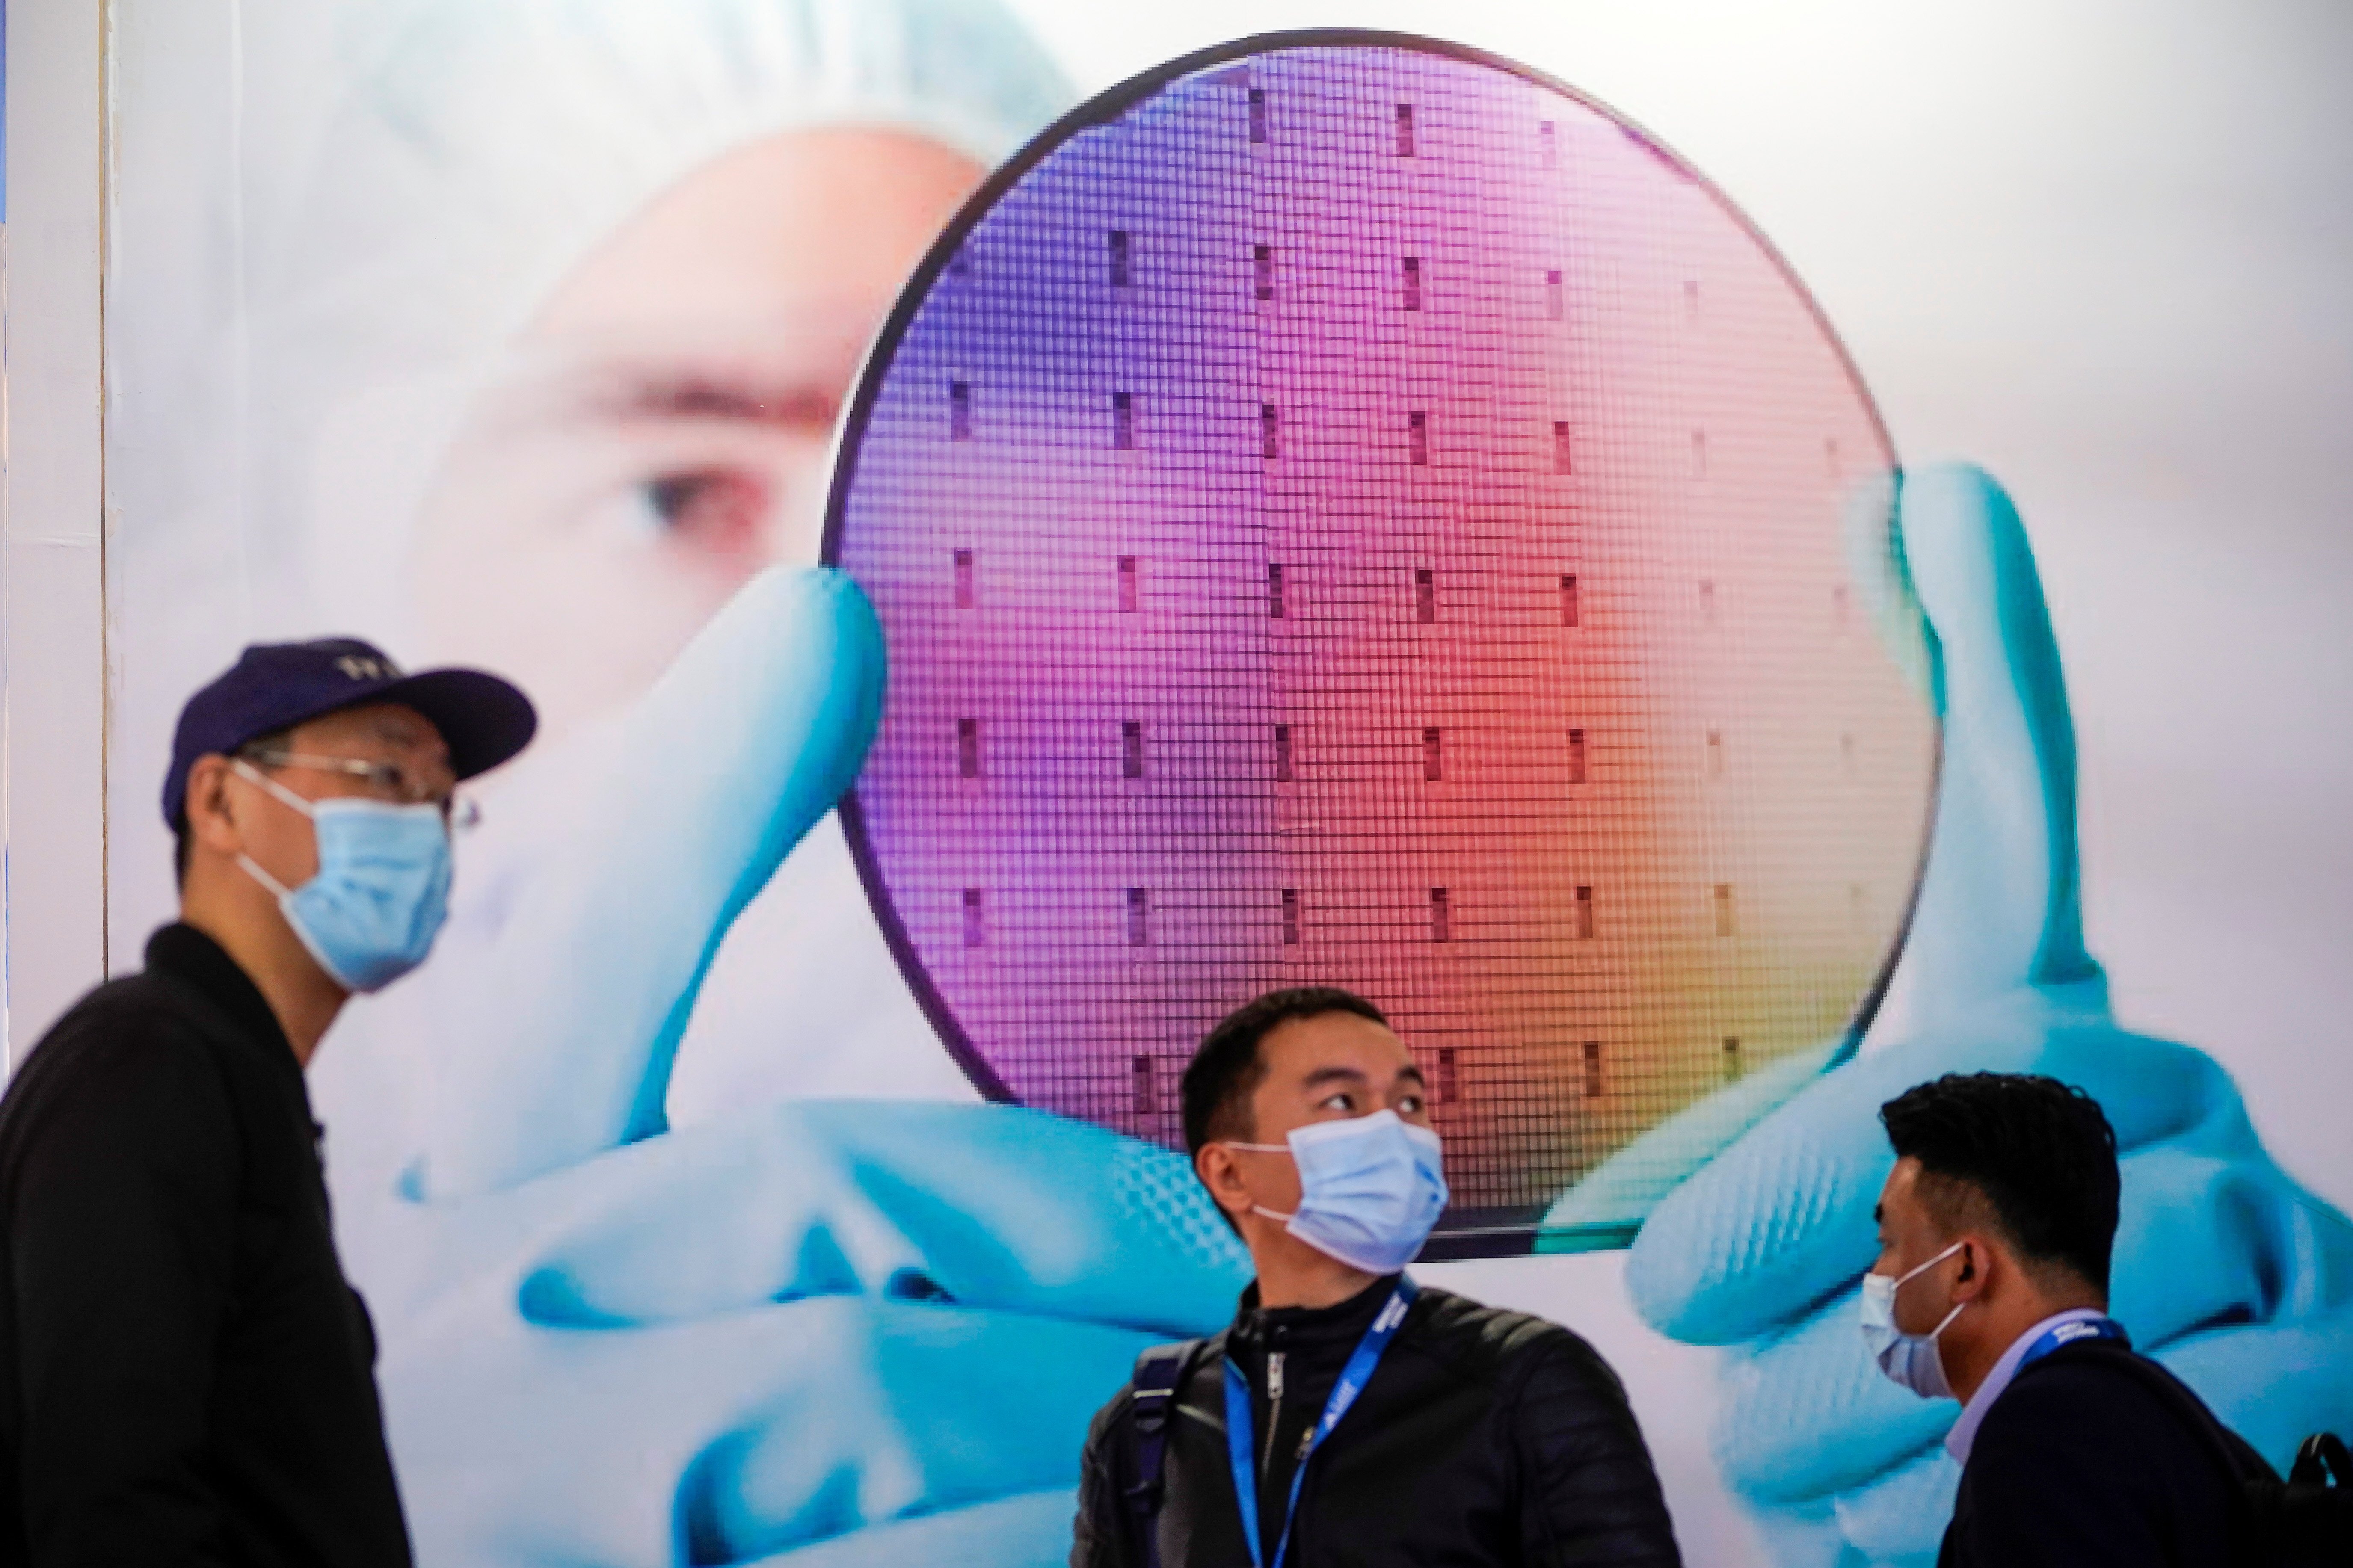 People visit a display of semiconductor technology at SEMICON China in Shanghai, March 17, 2021. Photo: Reuters/Aly Song